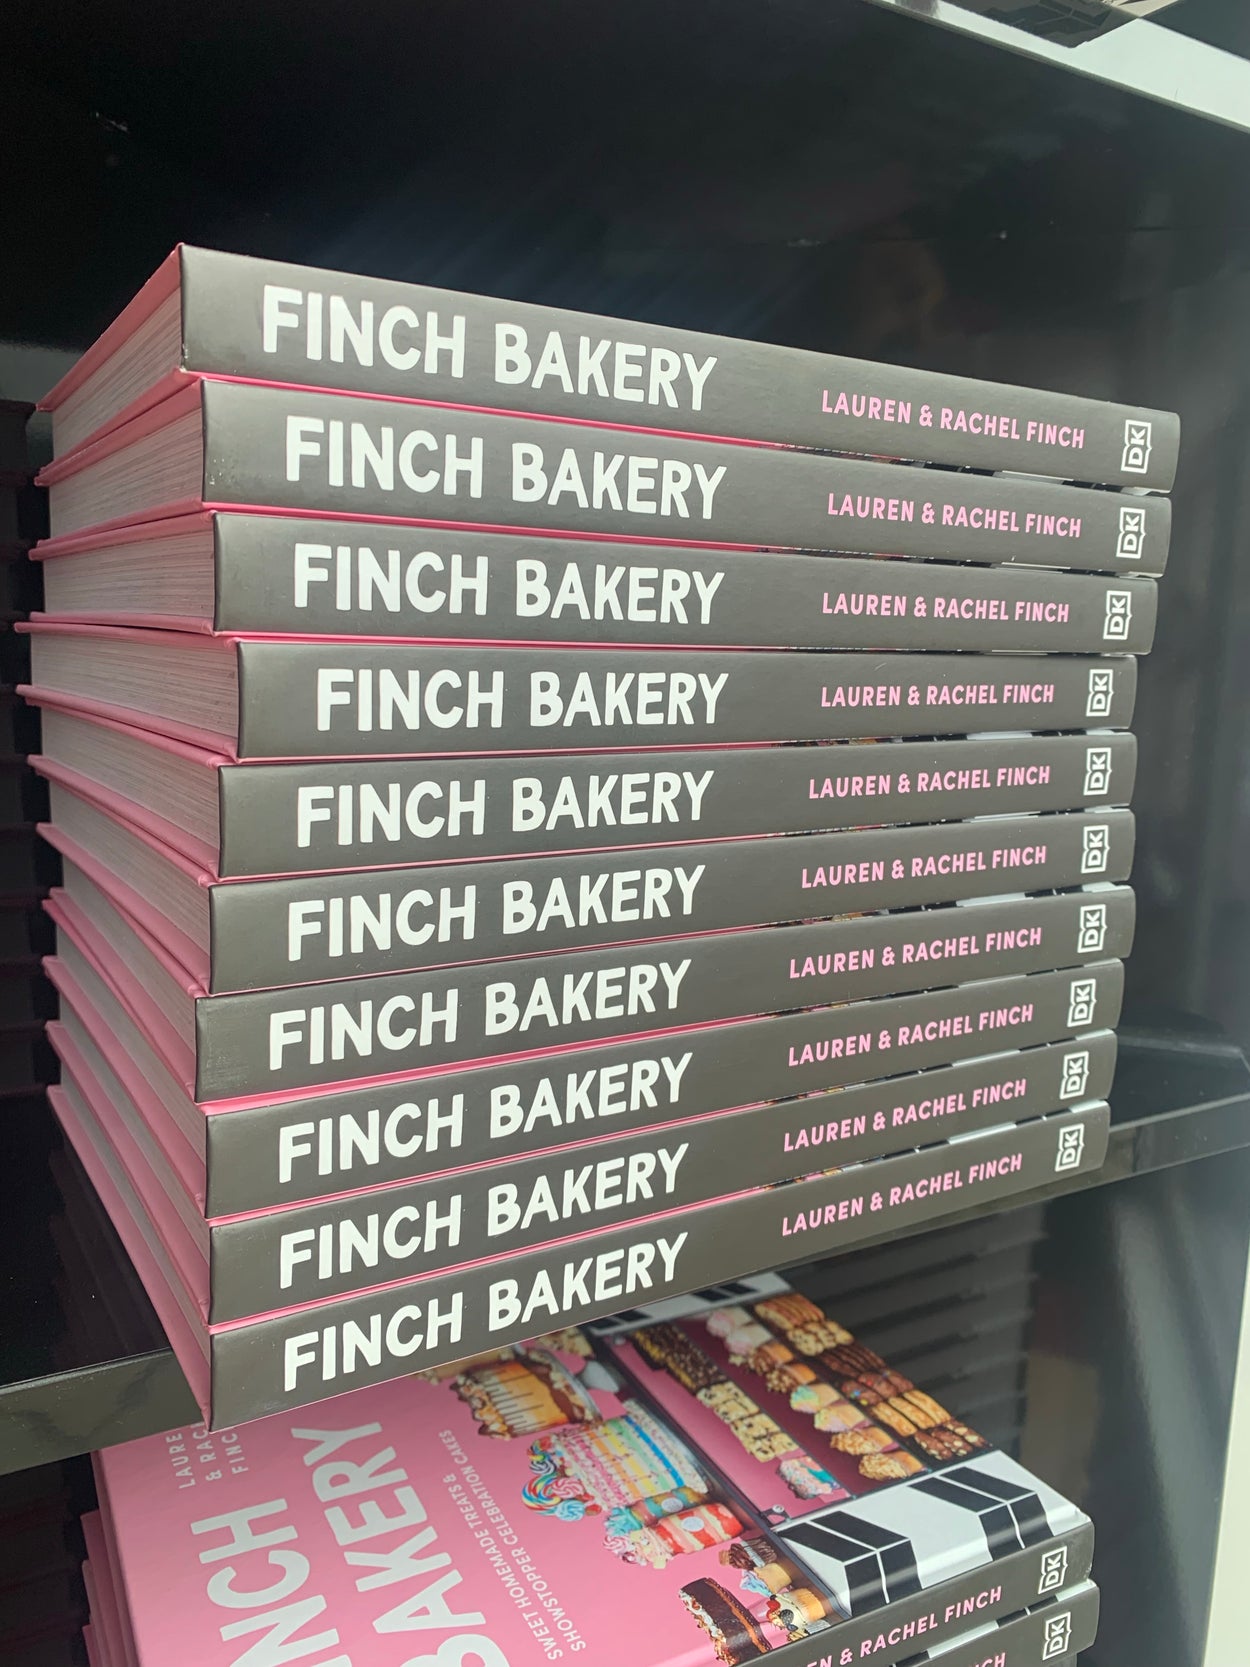 Finch Bakery: The Book (Personalised + Signed)